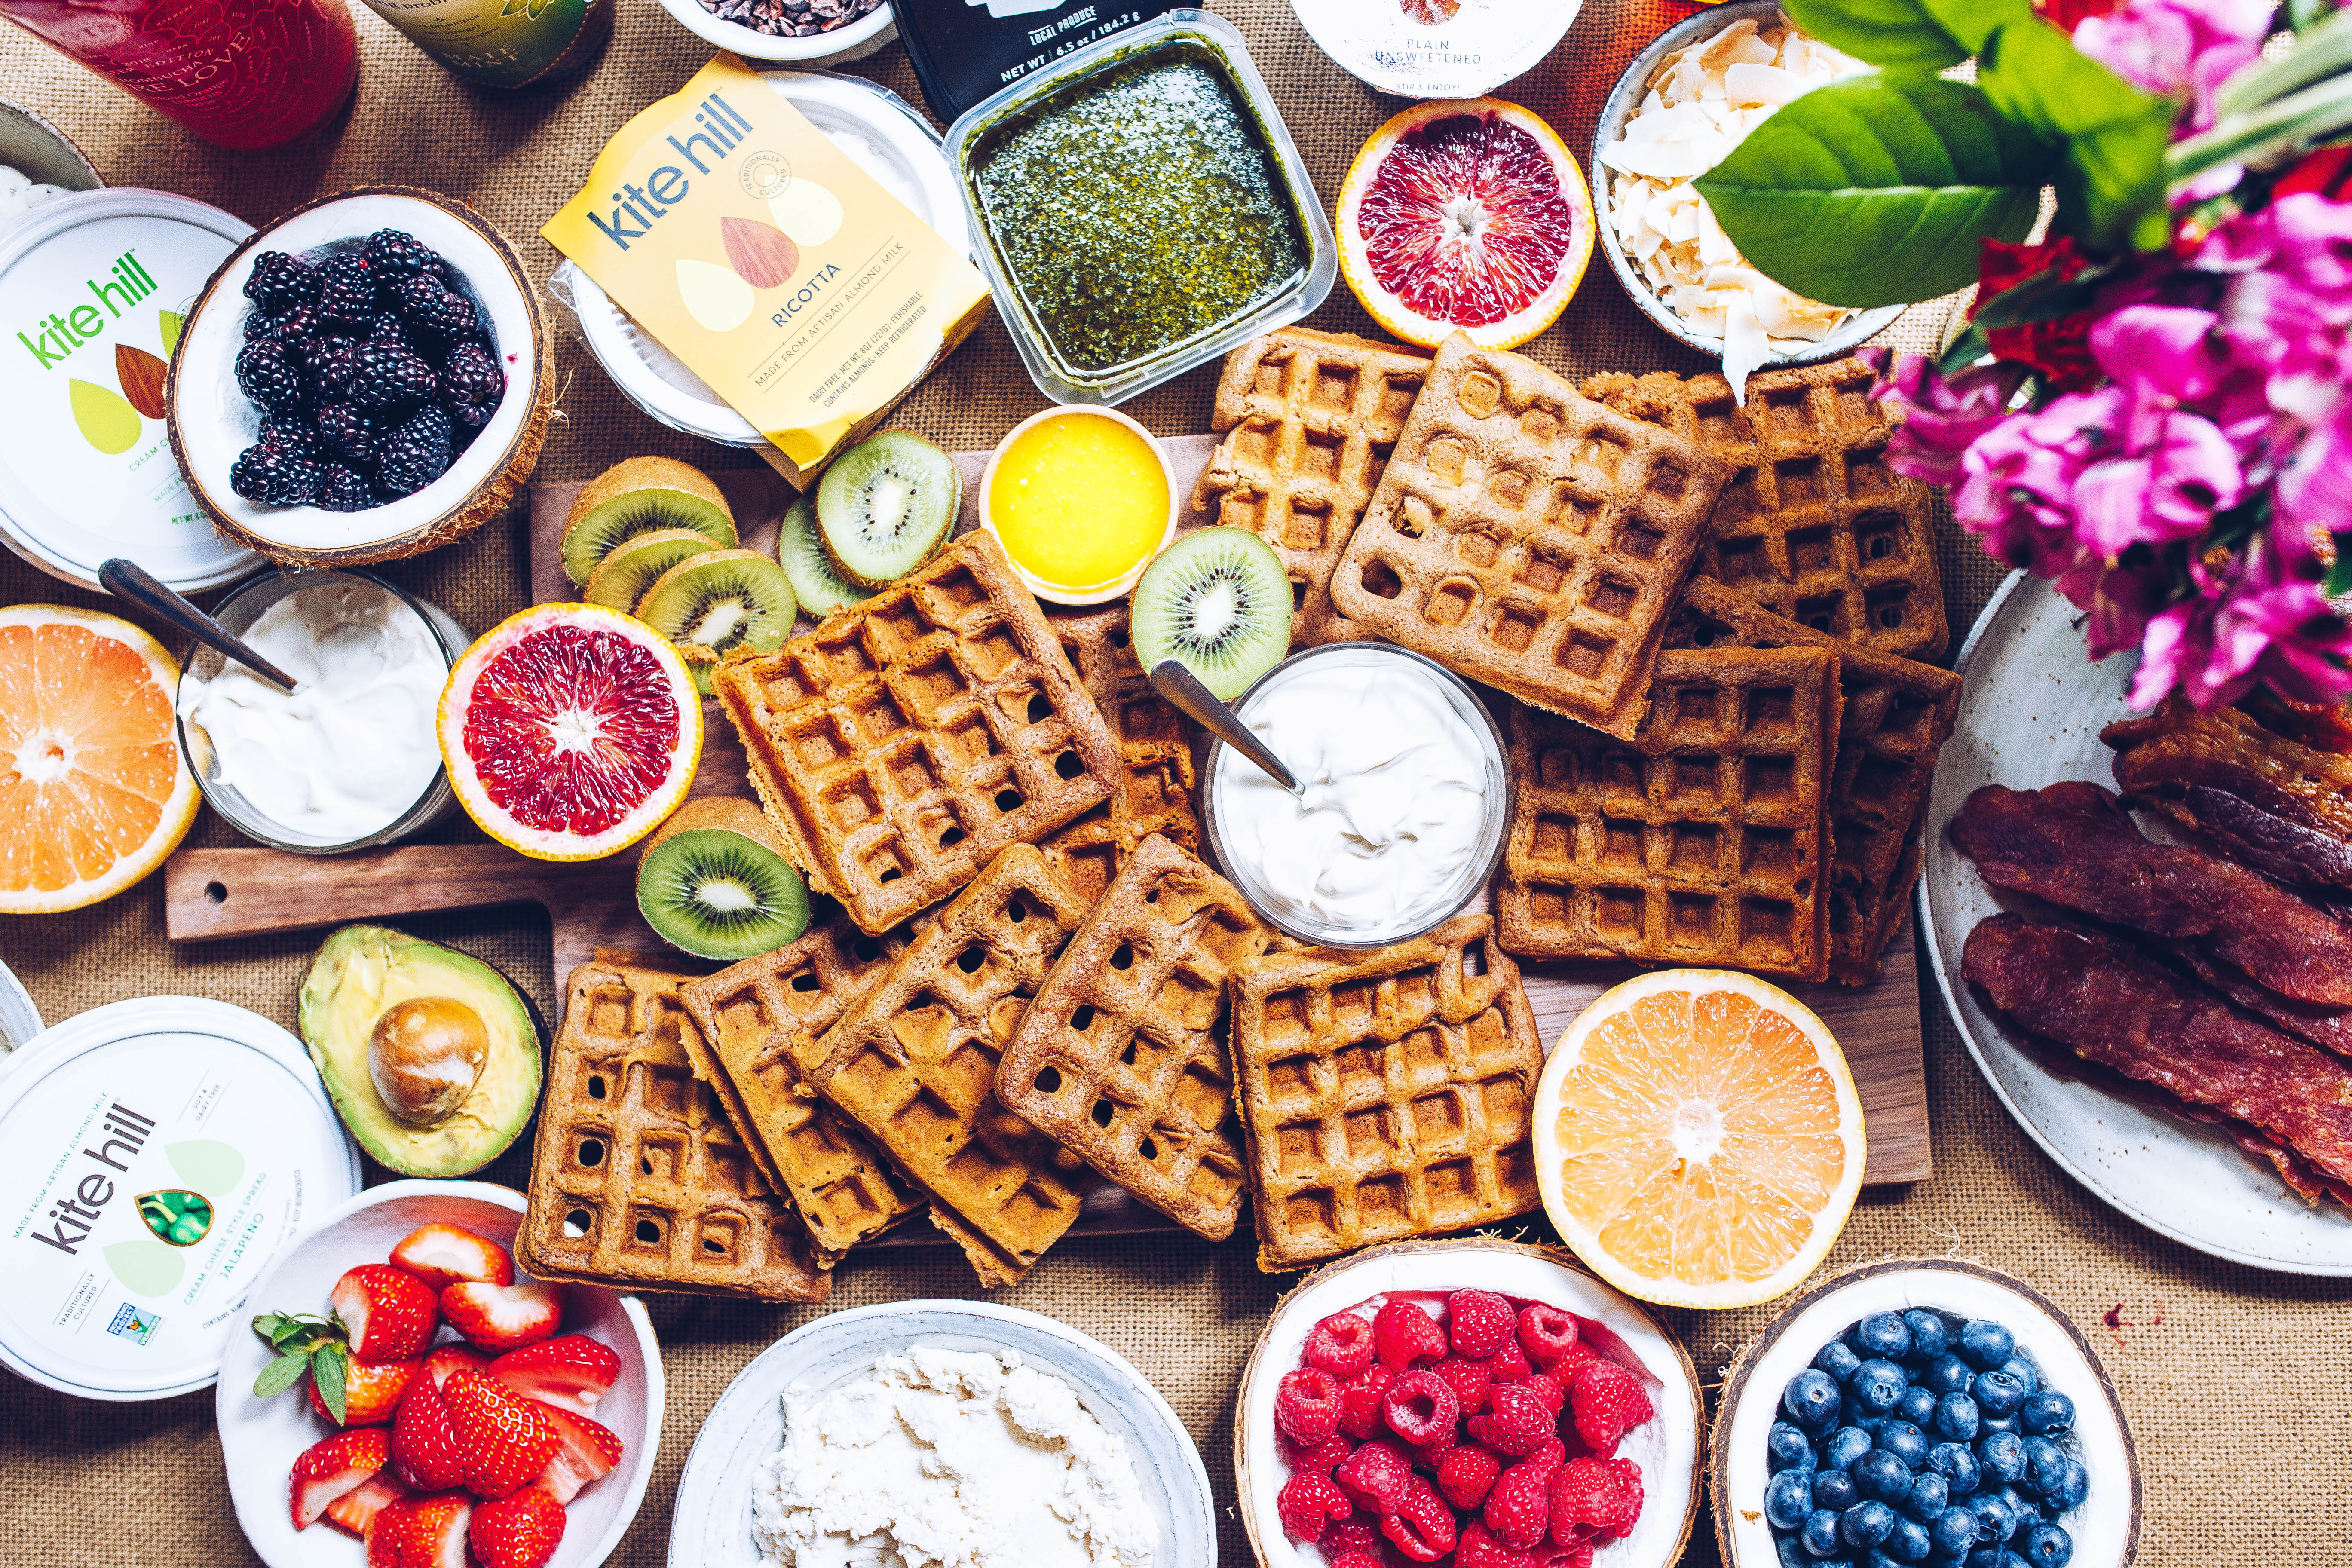 Paleo Waffle Brunch via Food by Mars with Kite Hill